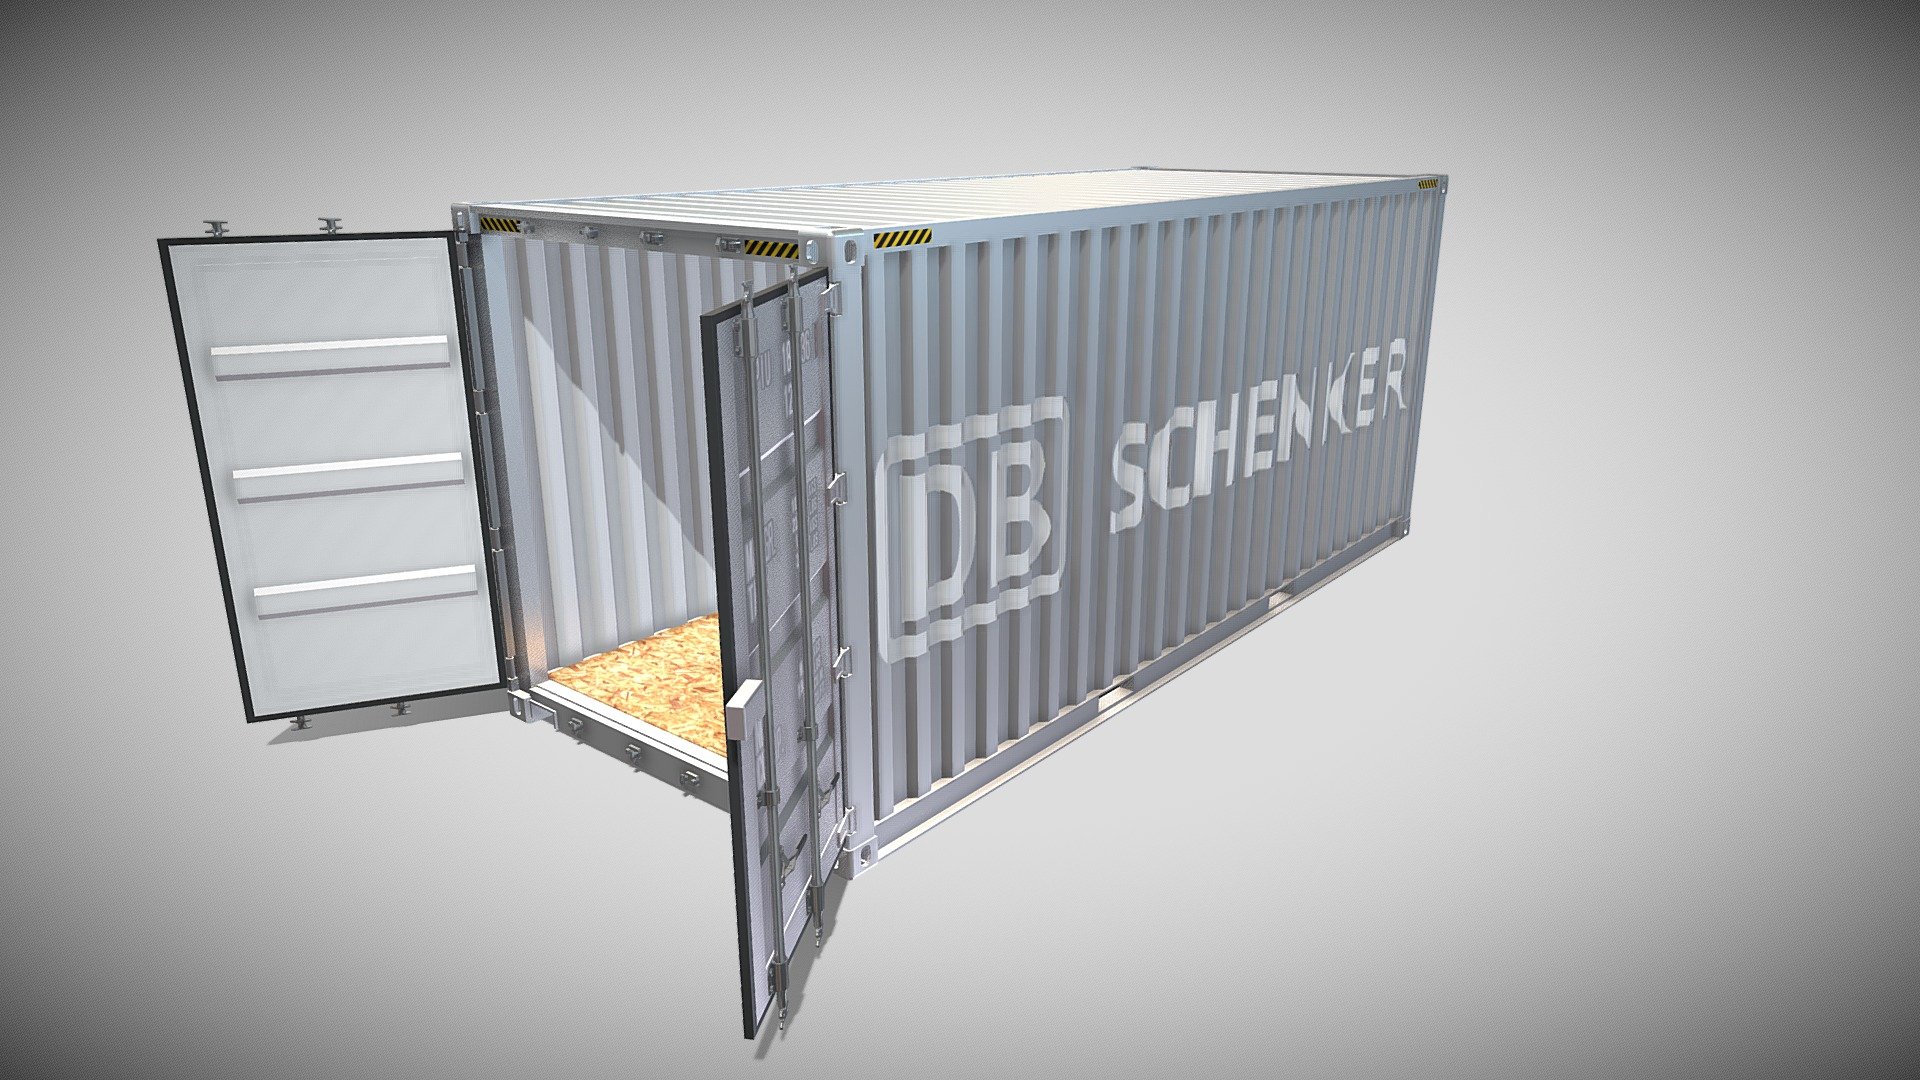 20ft Shipping Container 3d model rendered with Cycles in Blender, as per seen on attached images. 

File formats:
-.blend, rendered with cycles, as seen in the images;
-.obj, with materials applied;
-.dae, with materials applied;
-.fbx, with materials applied;
-.stl;

-.blend, with doors open, rendered with cycles, as seen in the images;
-.obj, with doors open, with materials applied;
-.dae, with doors open, with materials applied;
-.fbx, with doors open, with materials applied;
-.stl; - 20ft Shipping Container DB Schenker - Buy Royalty Free 3D model by dragosburian 3d model